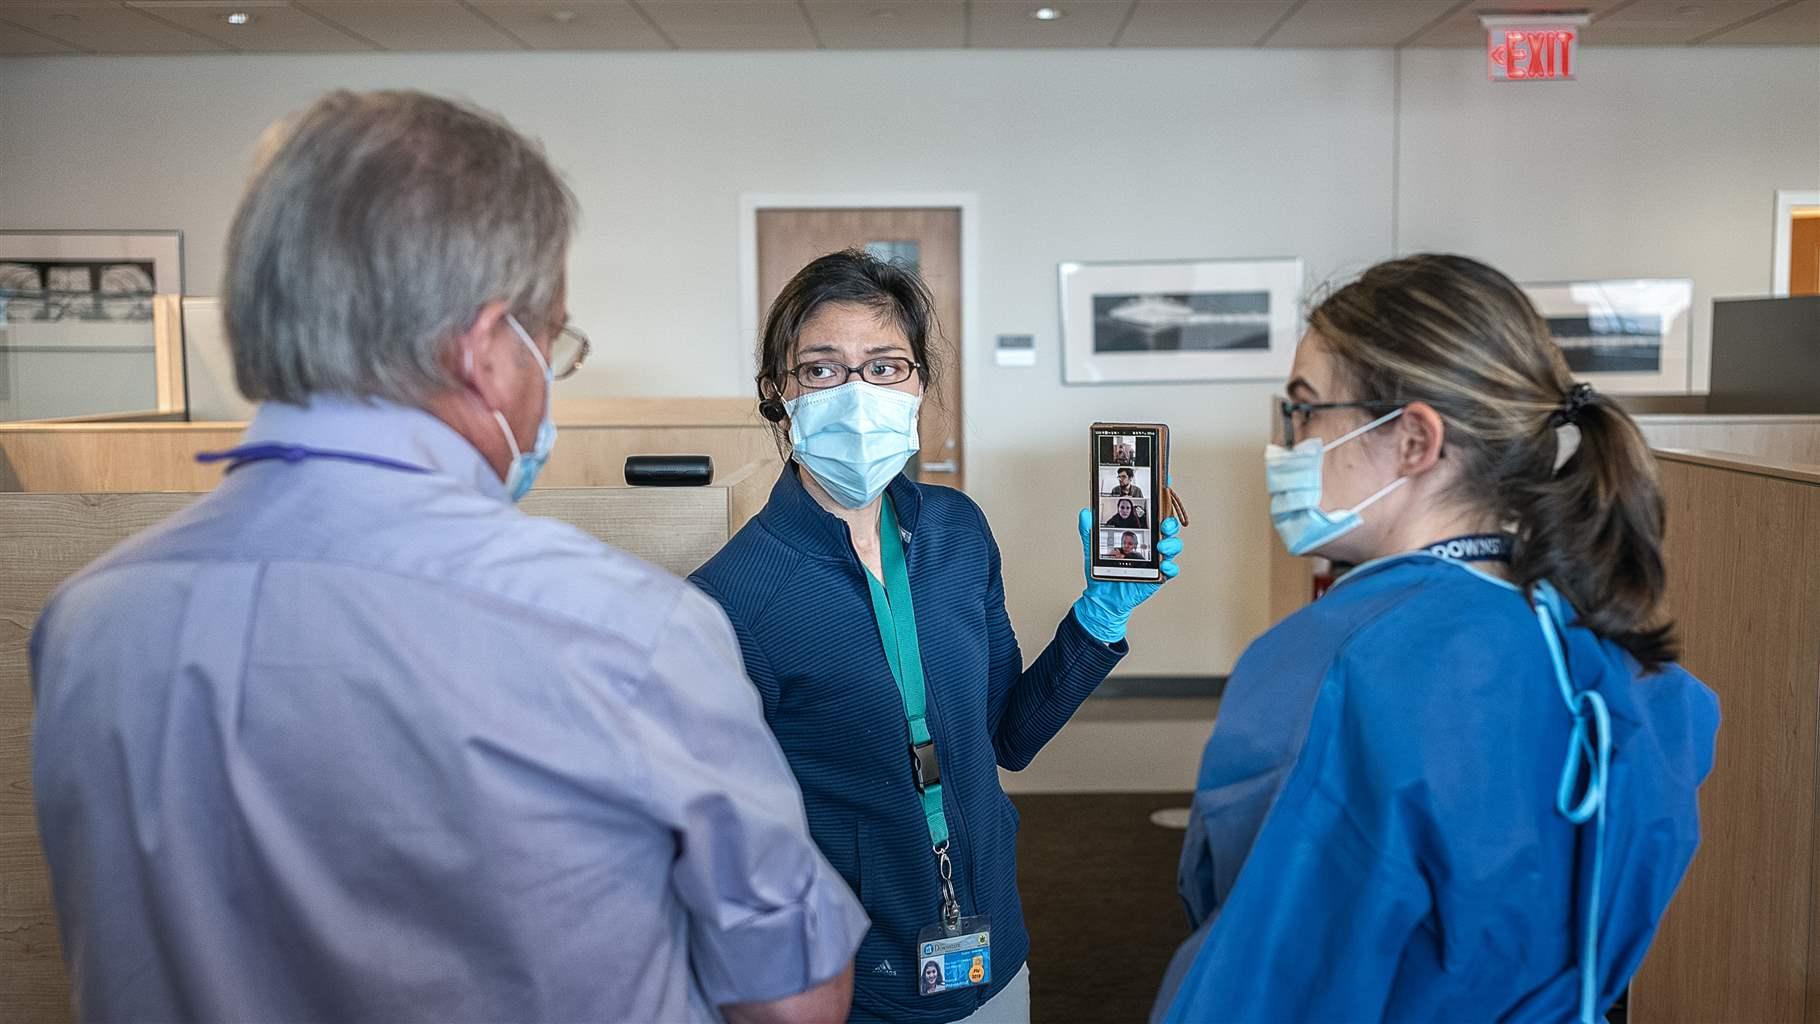 A group of medical professionals gather around a handheld medical device.